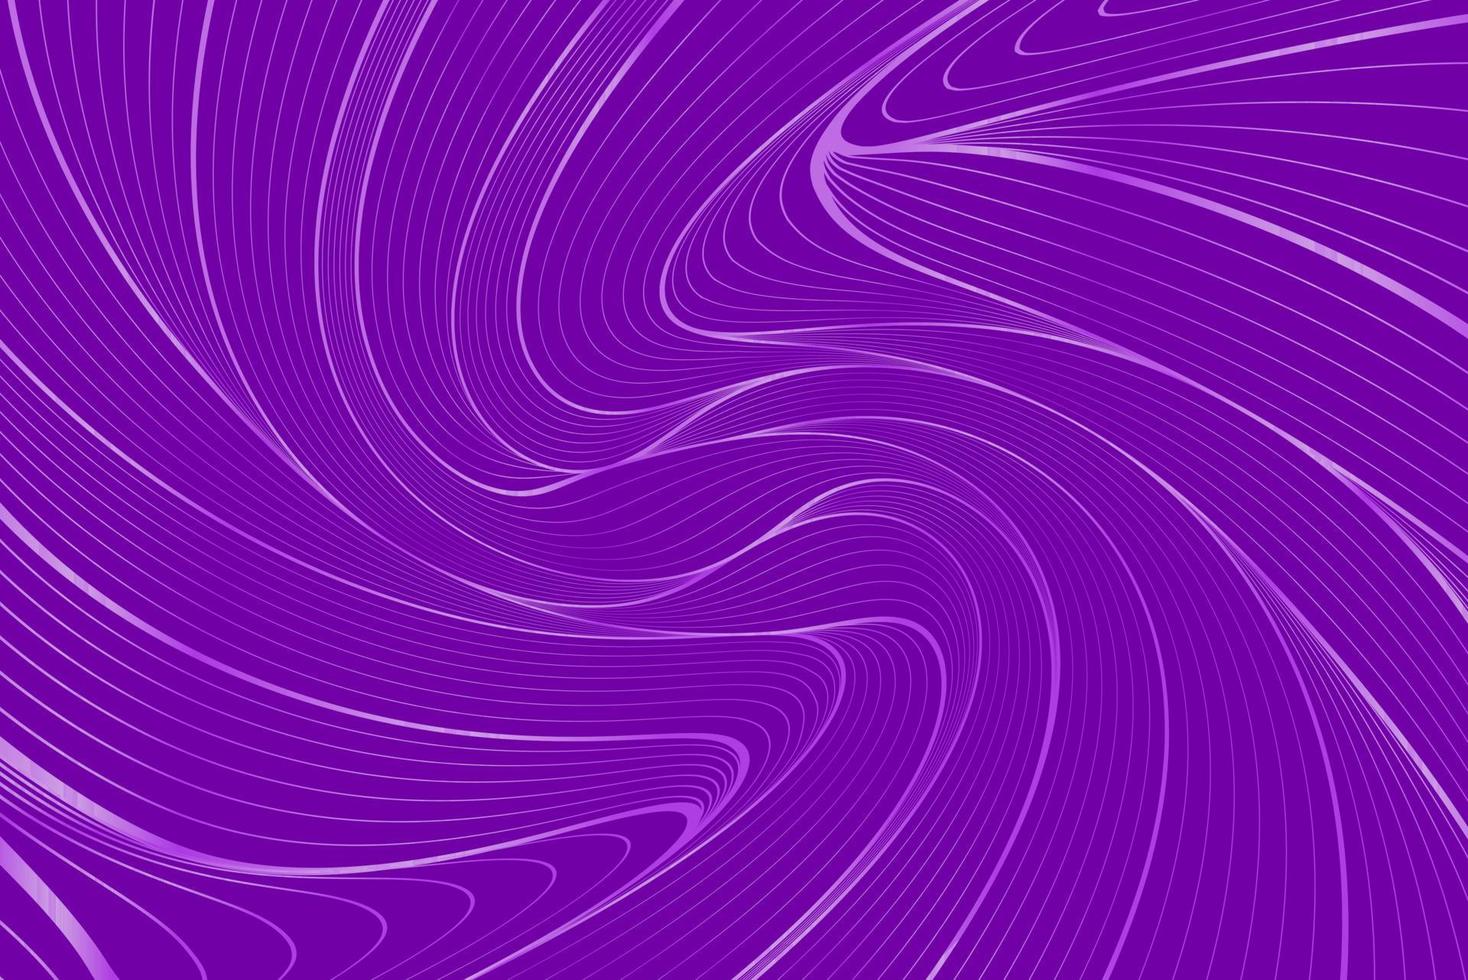 Abstract purple wave background. Dynamic shapes composition Eps10 vector